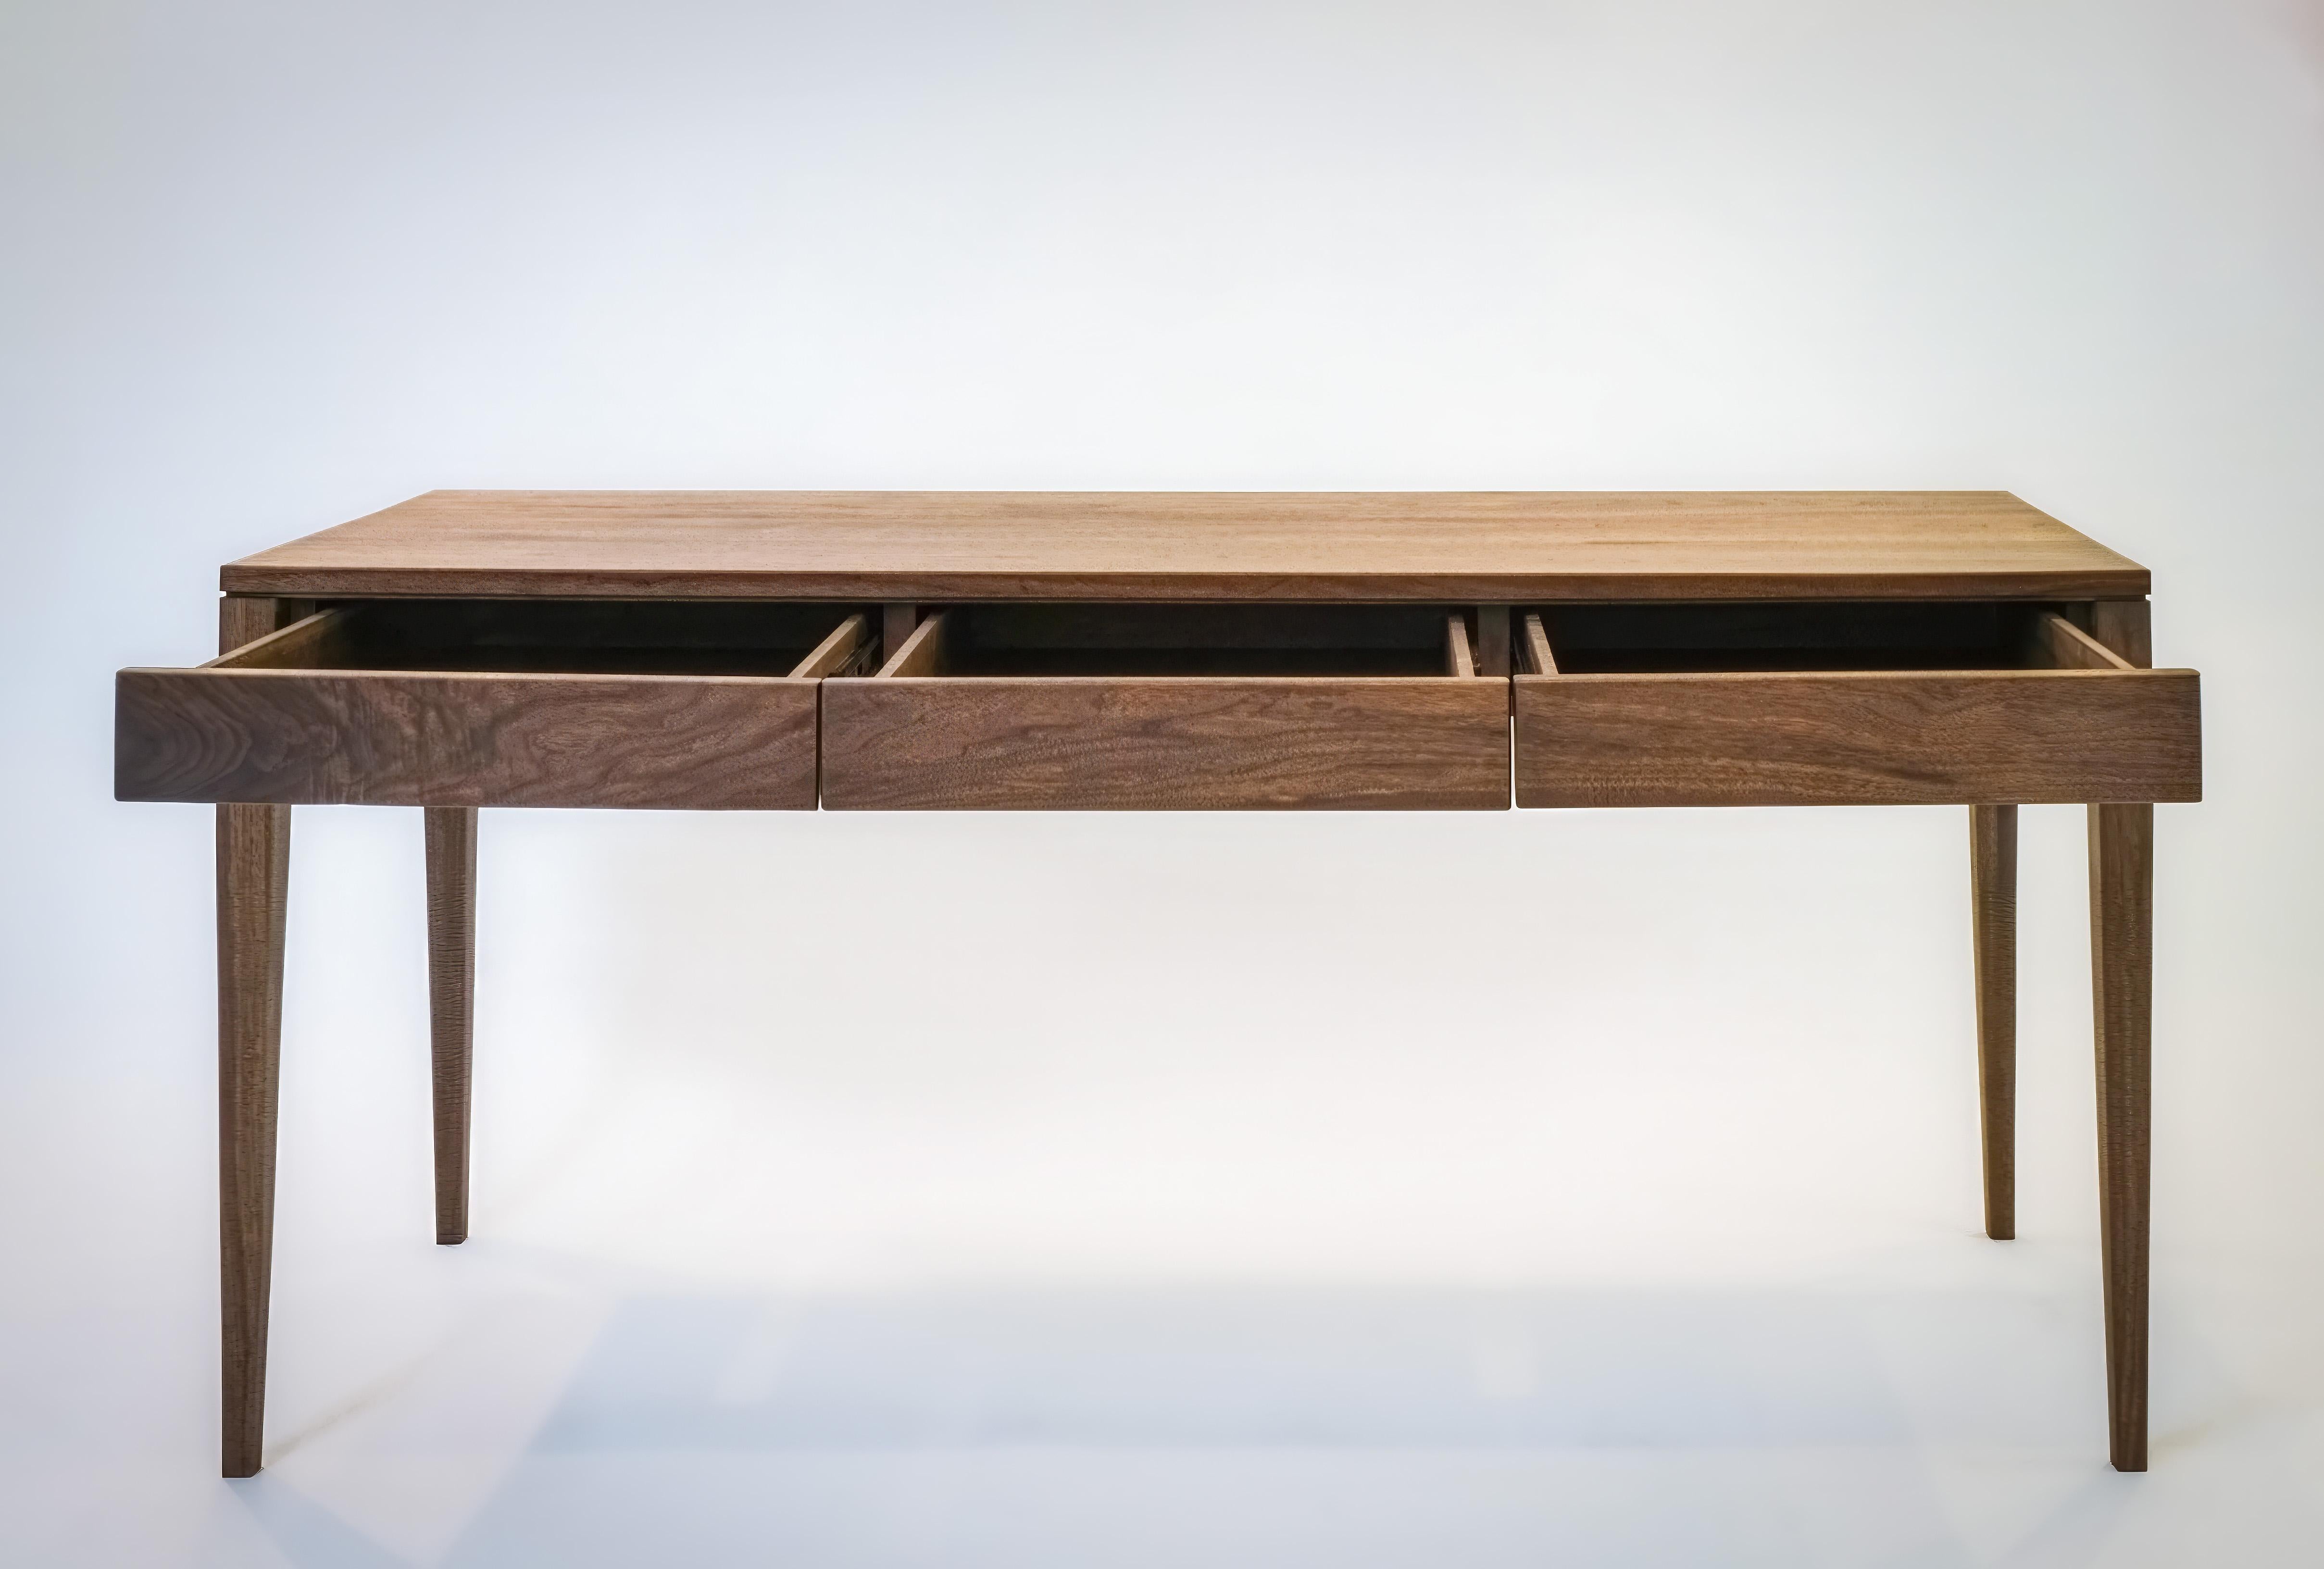 This molten grain walnut table spans in magical round over edges.
It is handcrafted in solid walnut with tapered legs, a perfect setup for a console or an artist's desk. Drawer fronts are one continuous board for a grain match. 




Own a